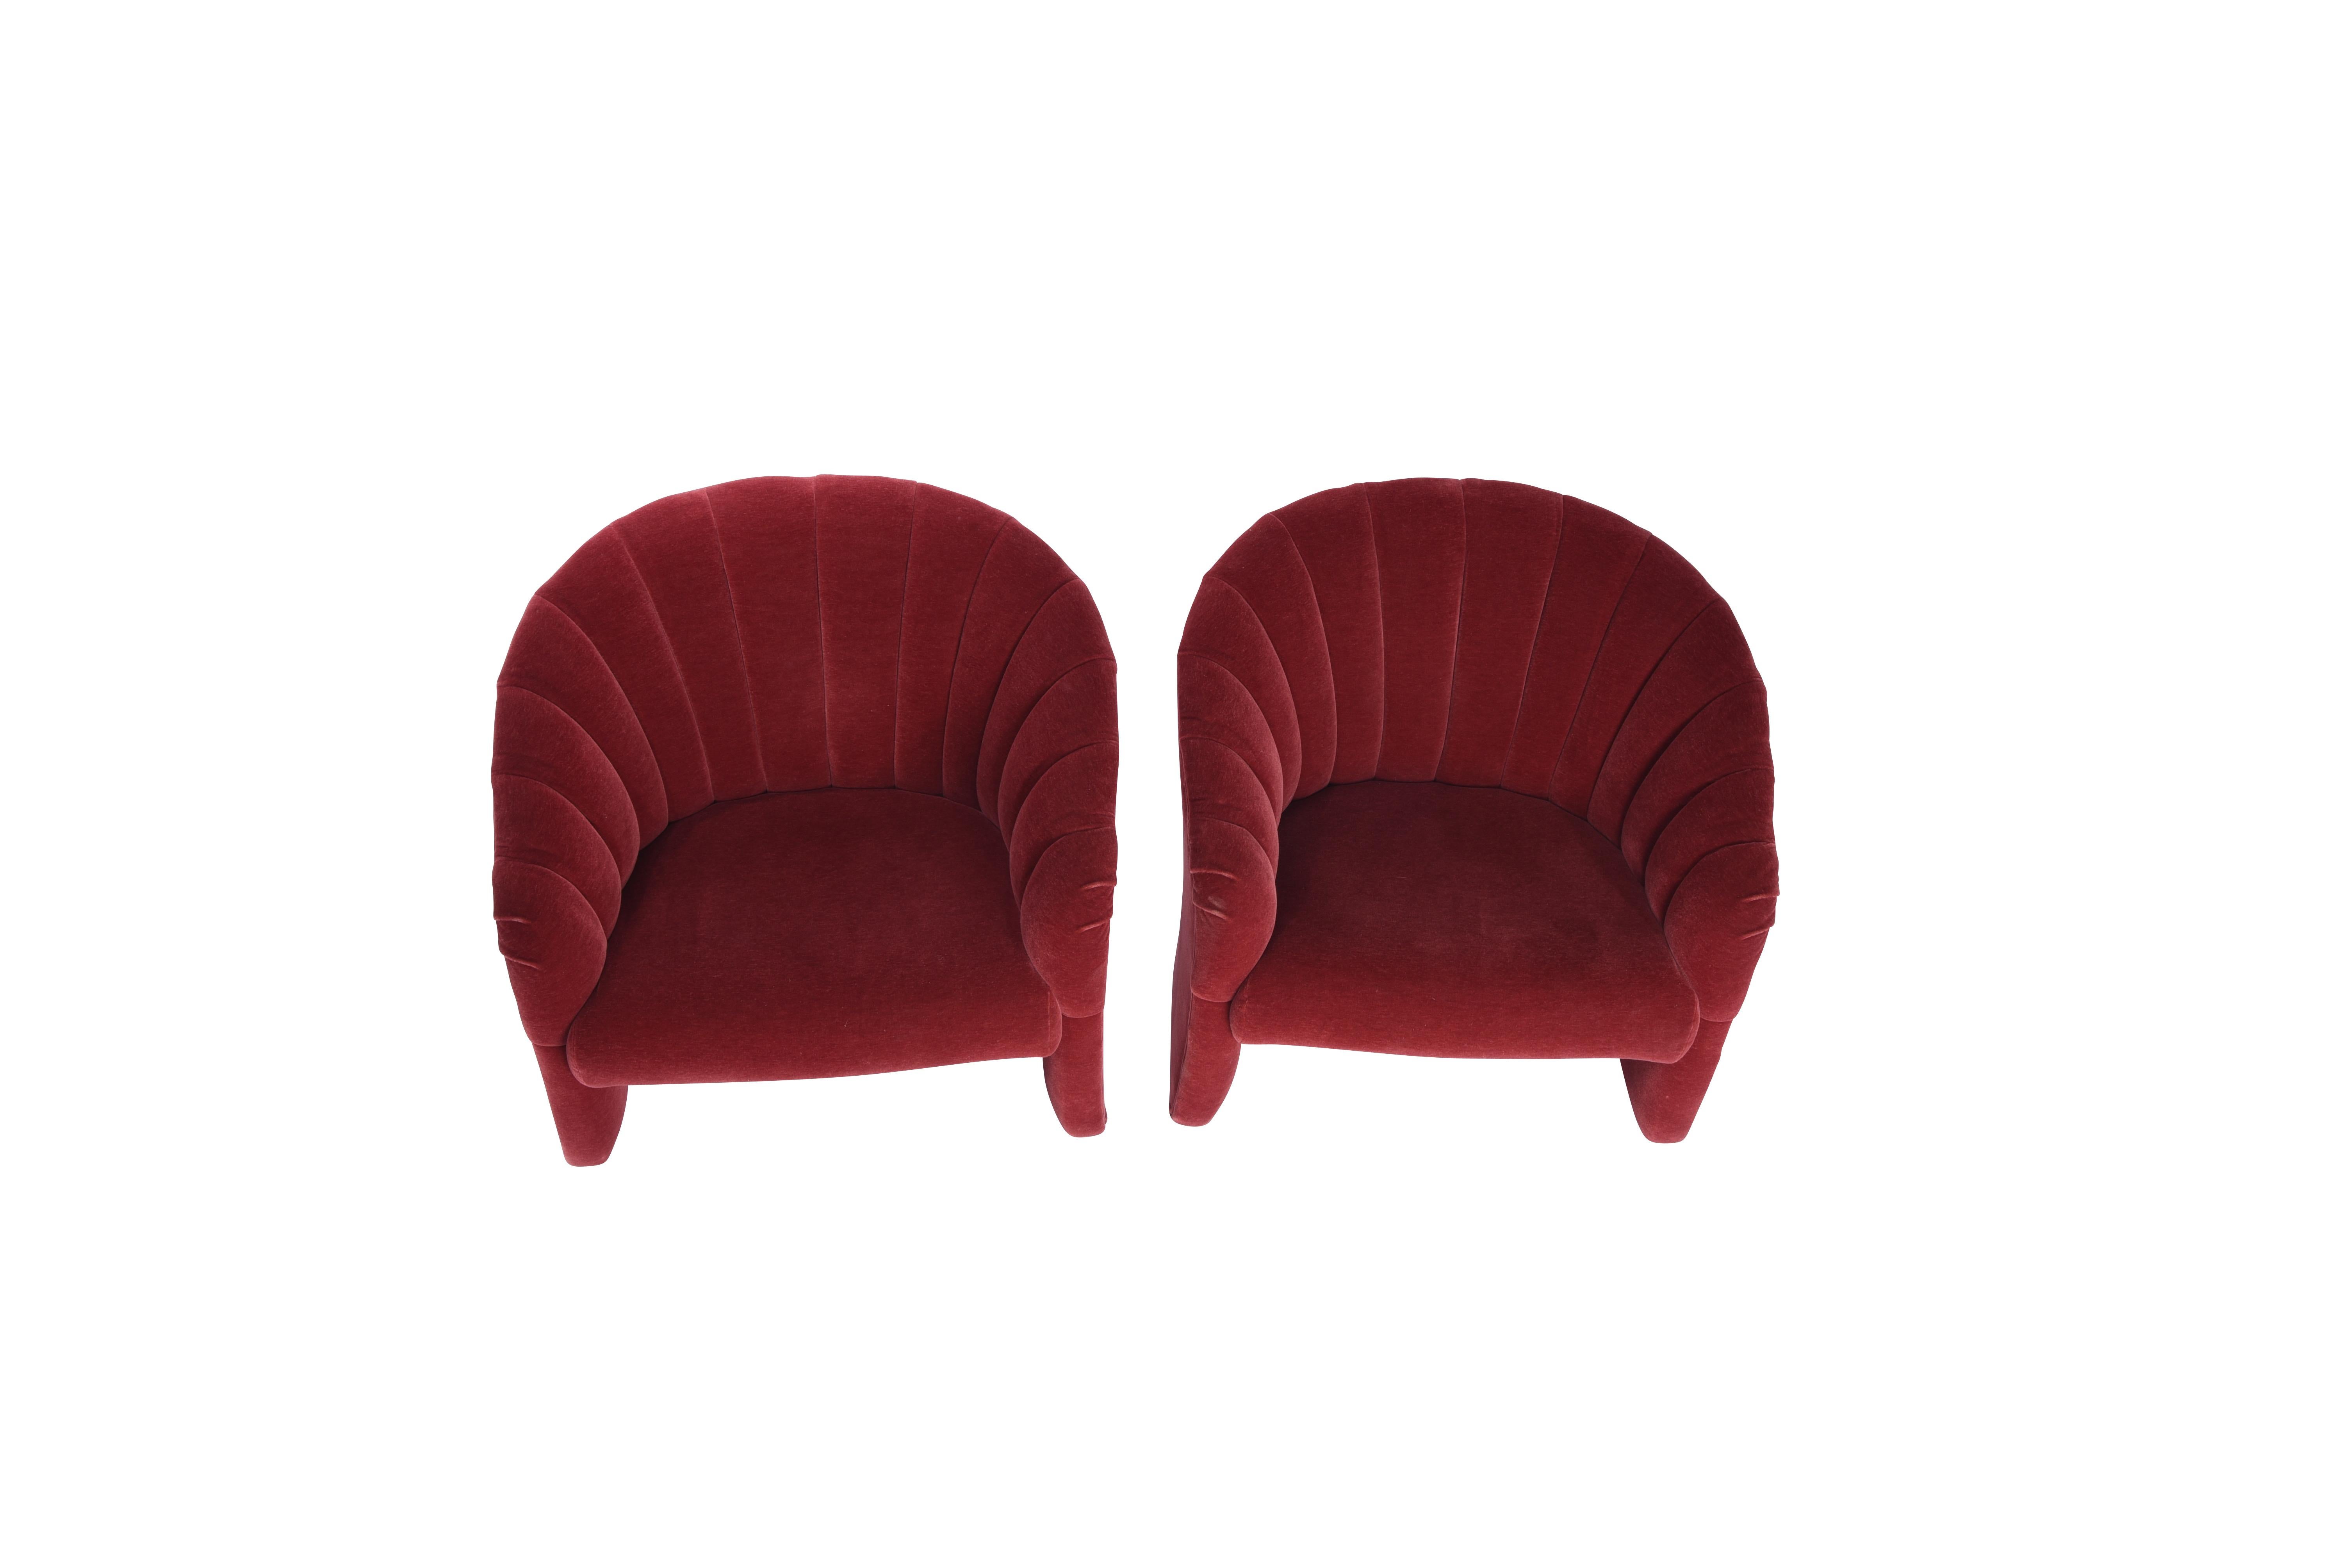 American Red Mohair Barrel Back Lounge Chairs, 1970